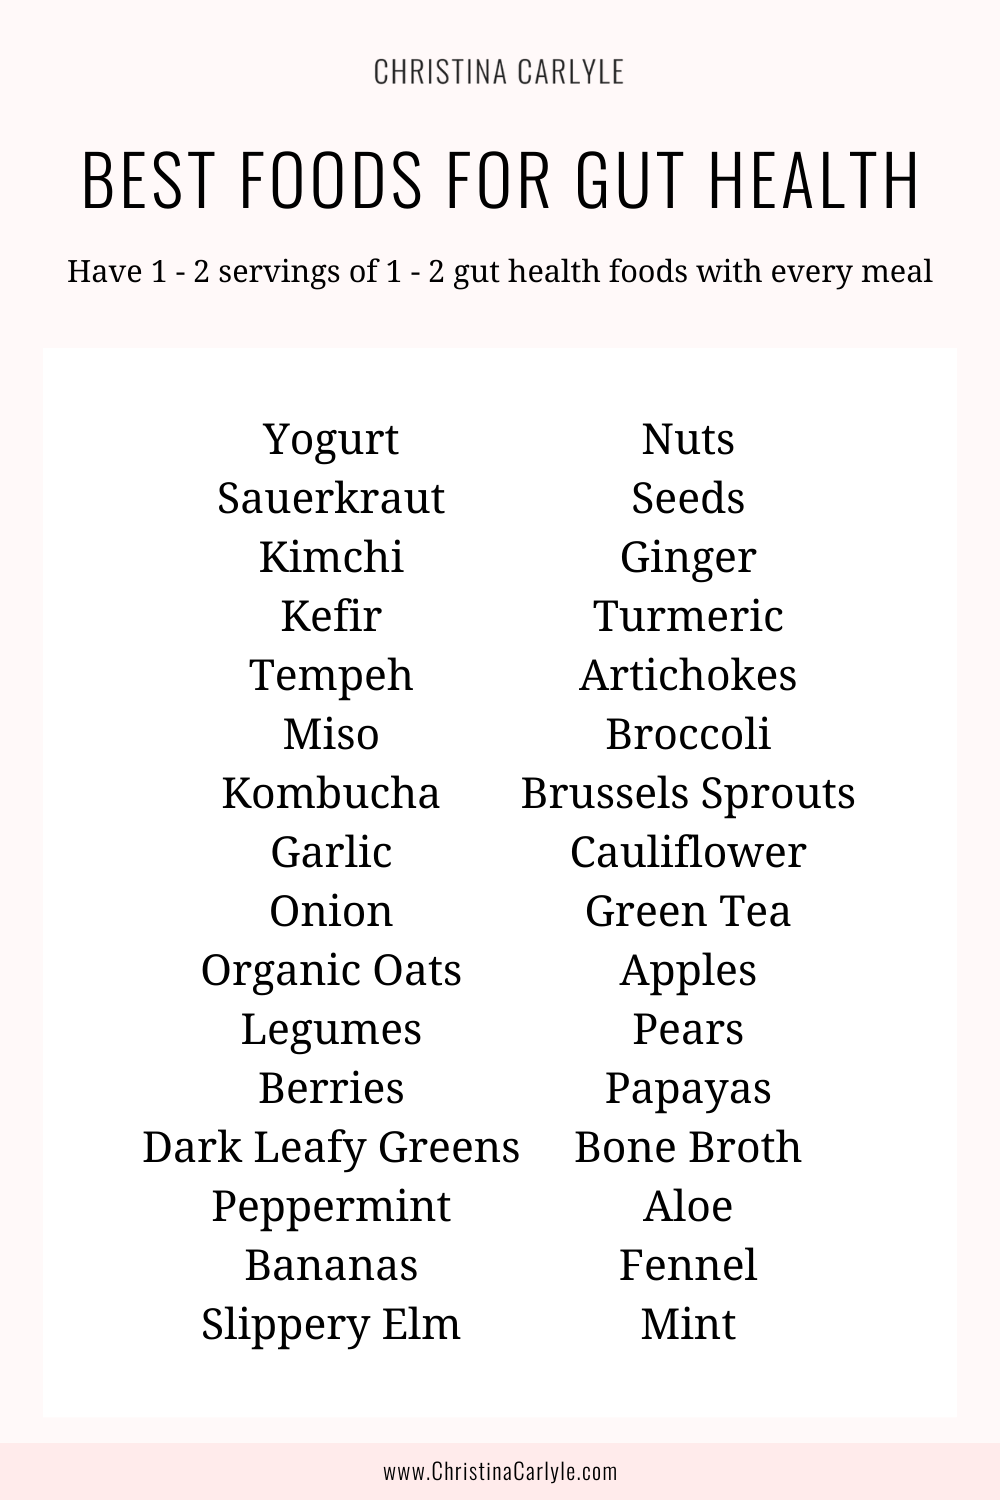 a list of the top 30 foods for the gut and text that says Best Foods for Gut Health